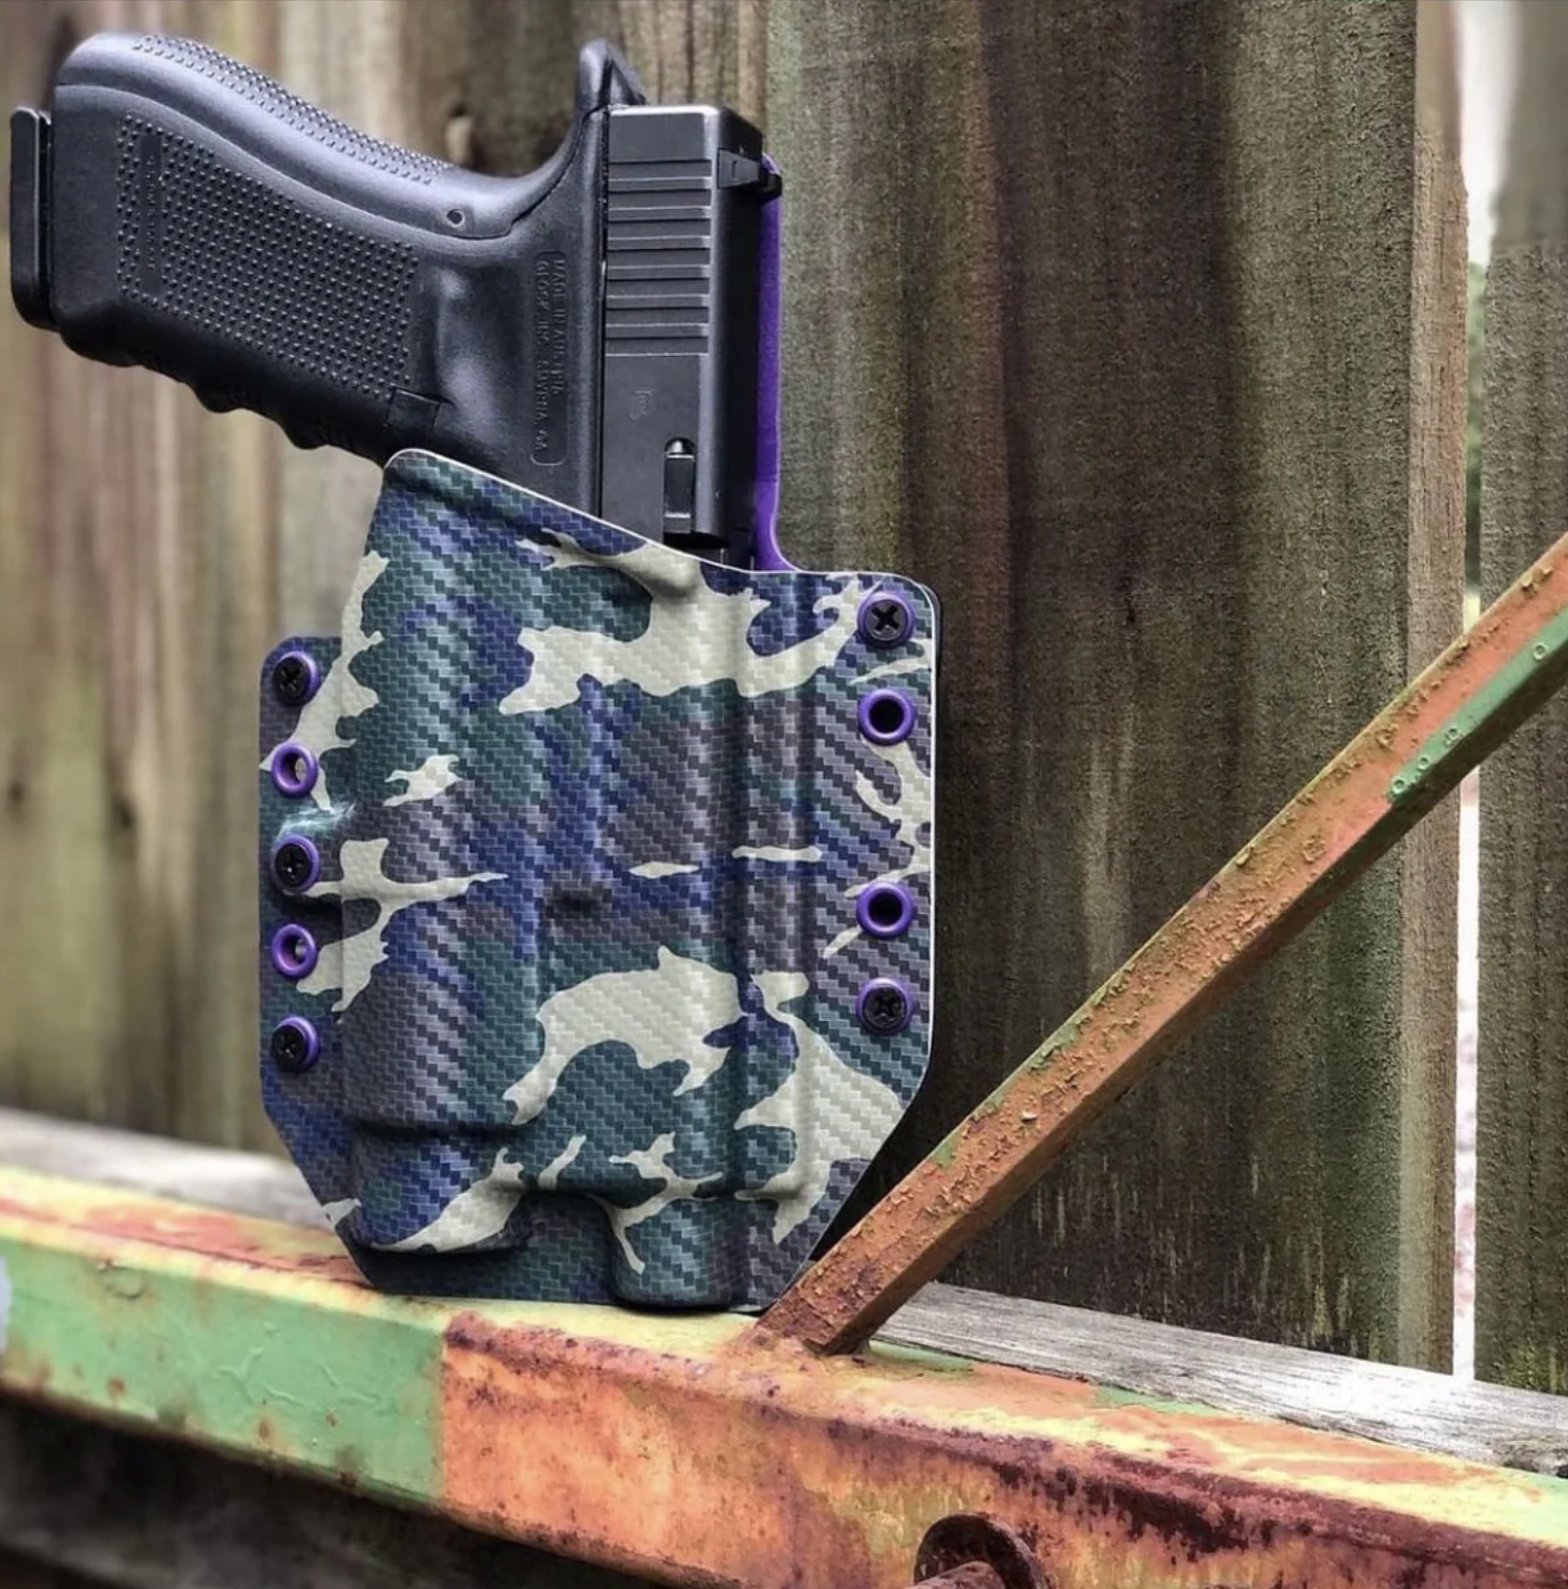 Holster Accessories, Qls Compatible Holsters